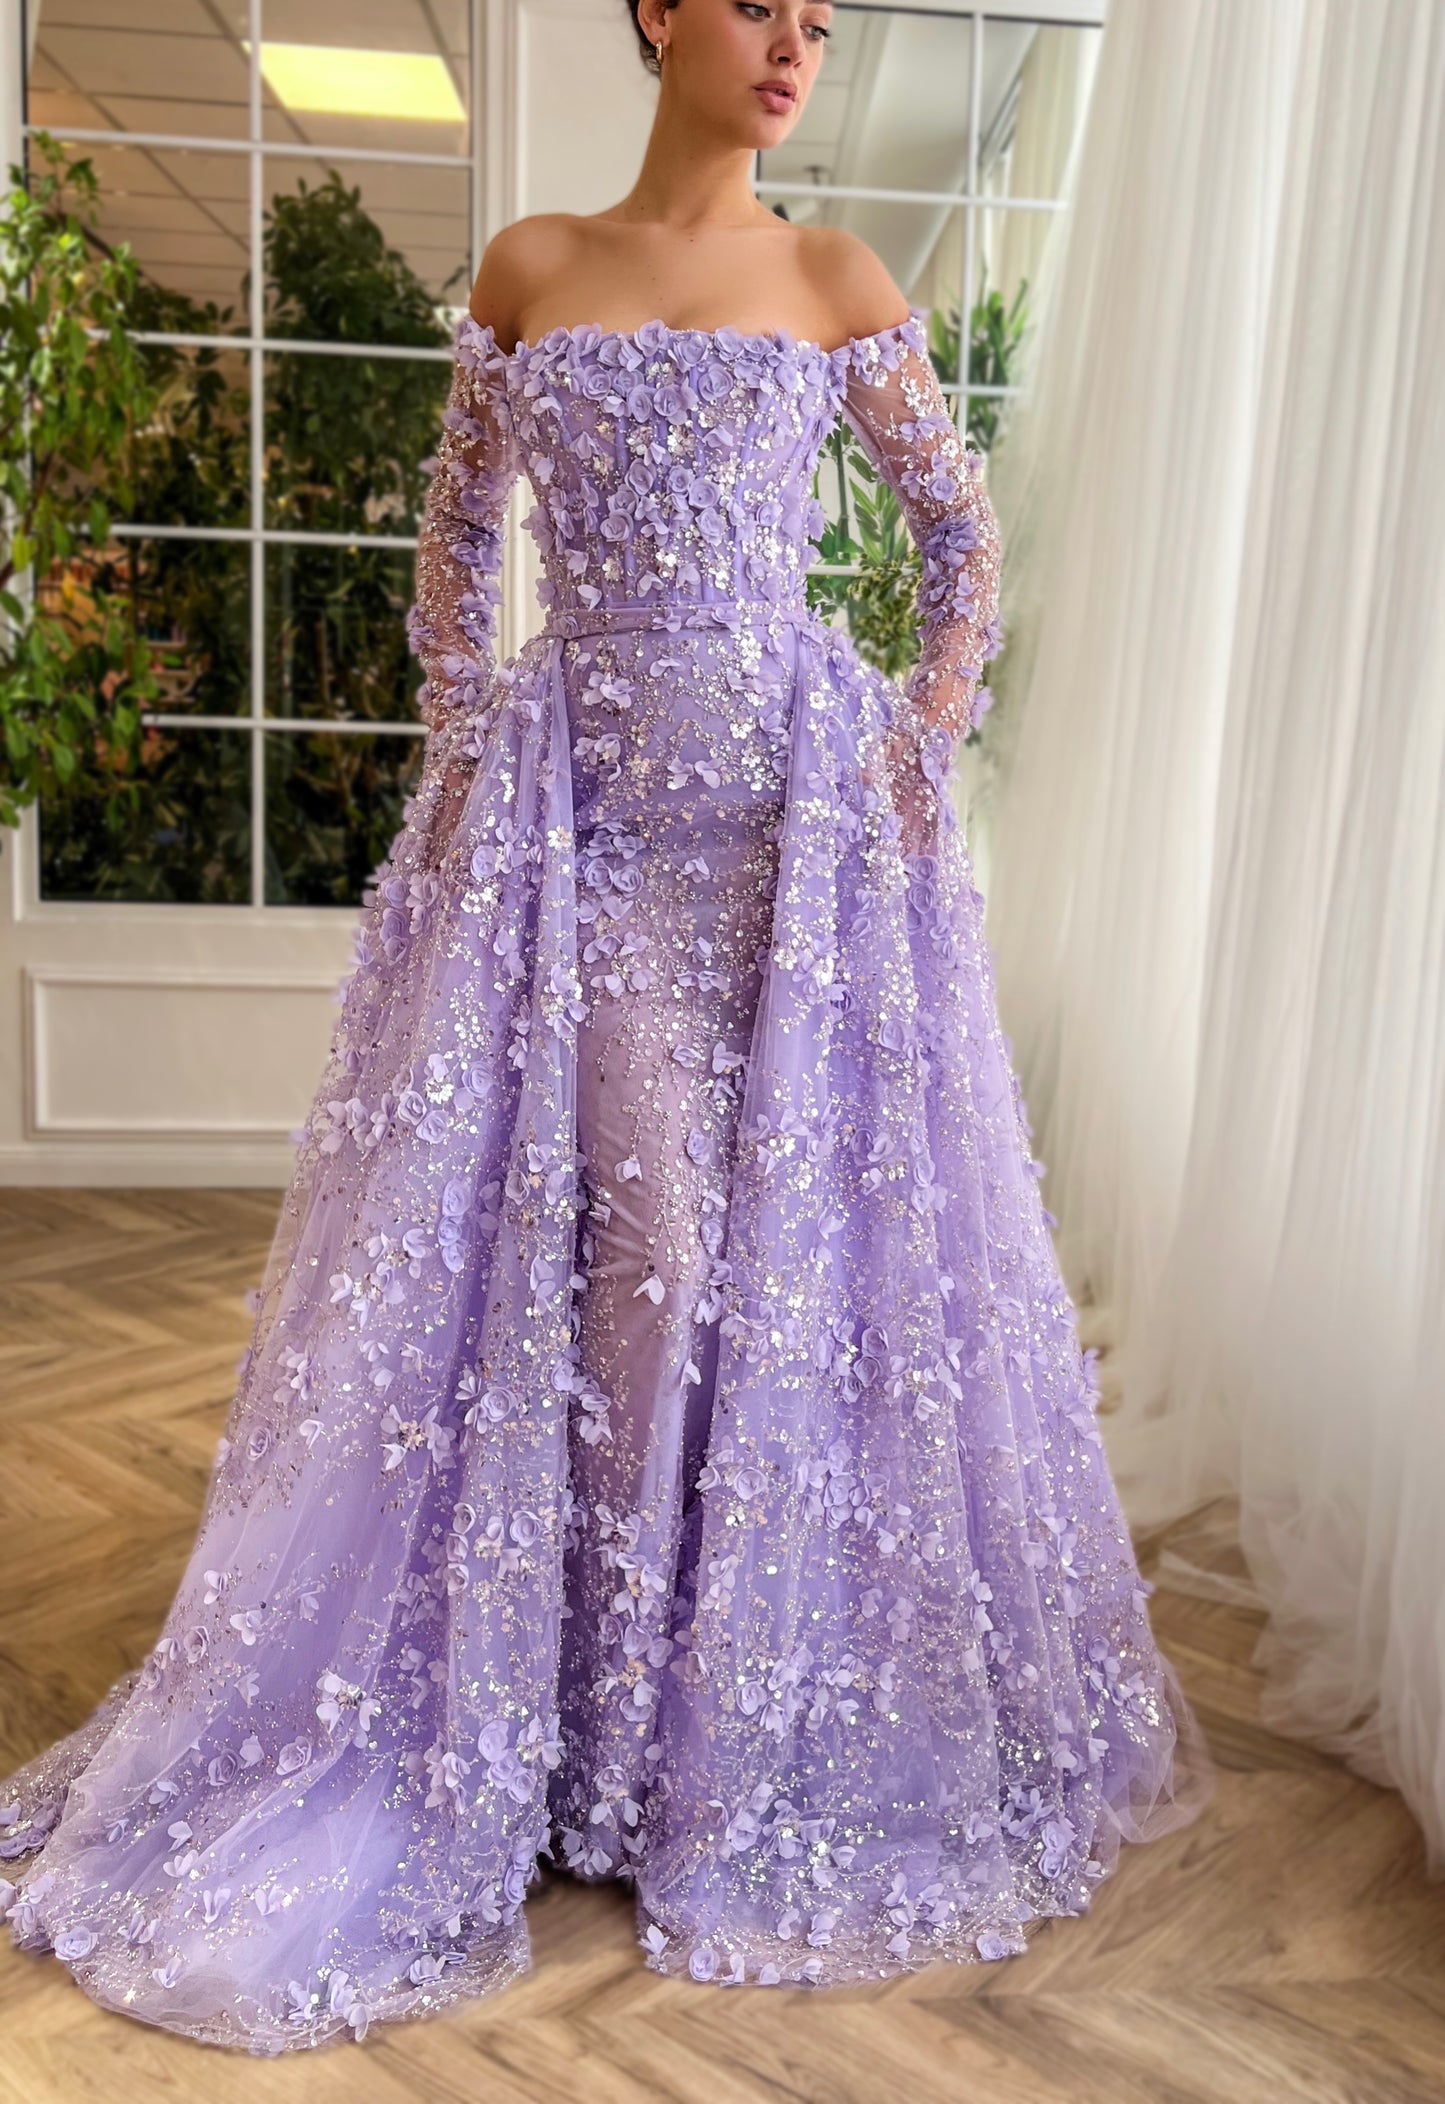 Purple overskirt dress with long off the shoulder sleeves and embroidered flowers